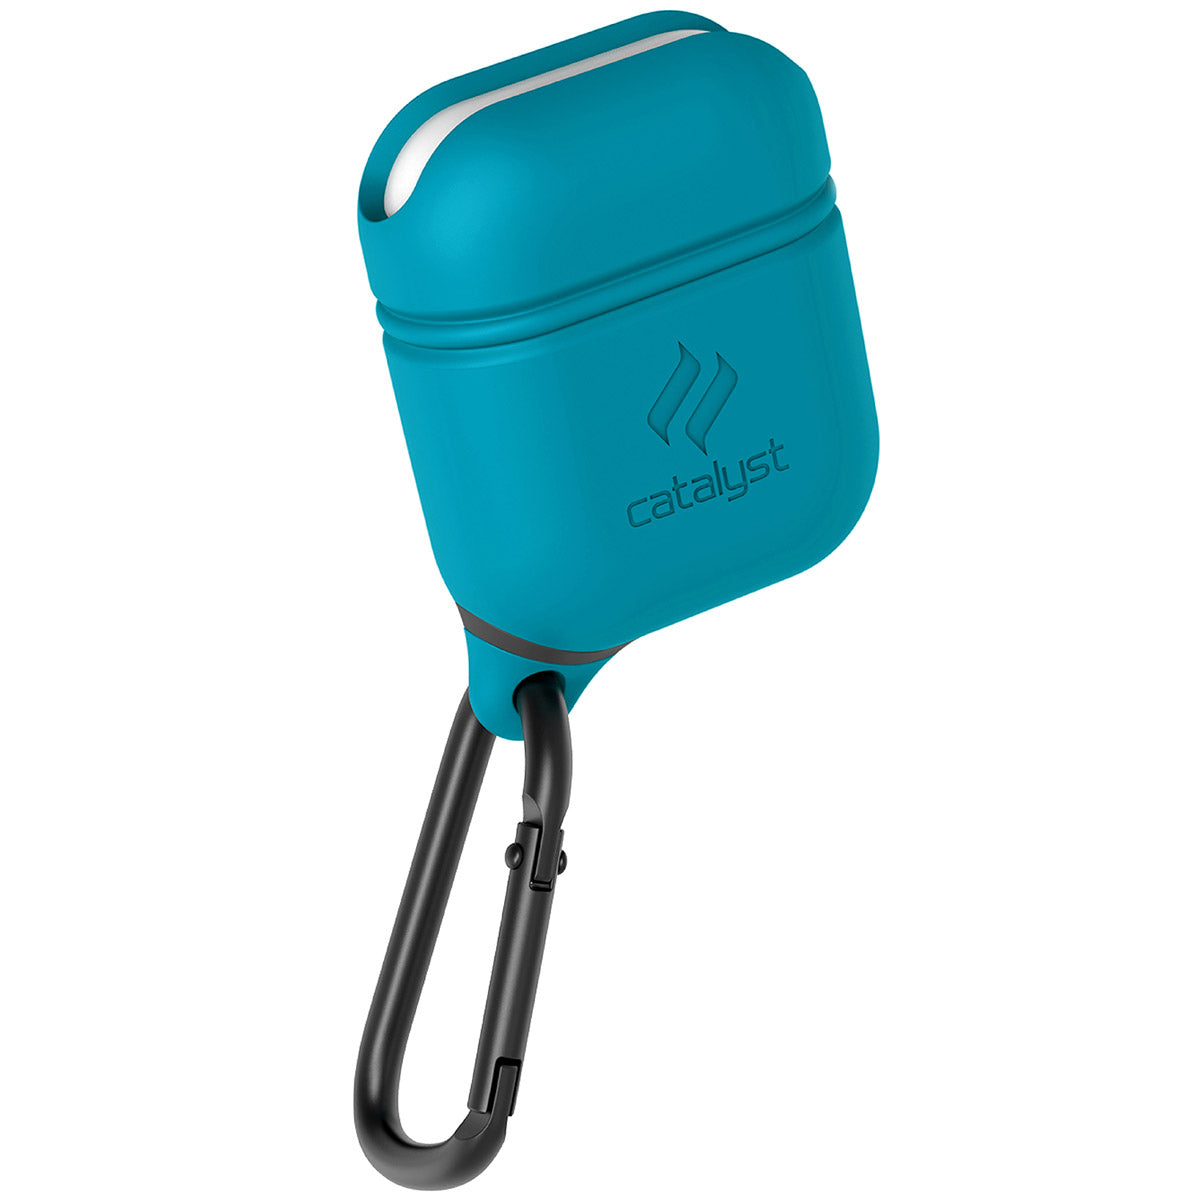 CATAPDTEAL | Catalyst airpods gen2/1 waterproof case + carabiner showing the front view of the case in glacier blue colorway